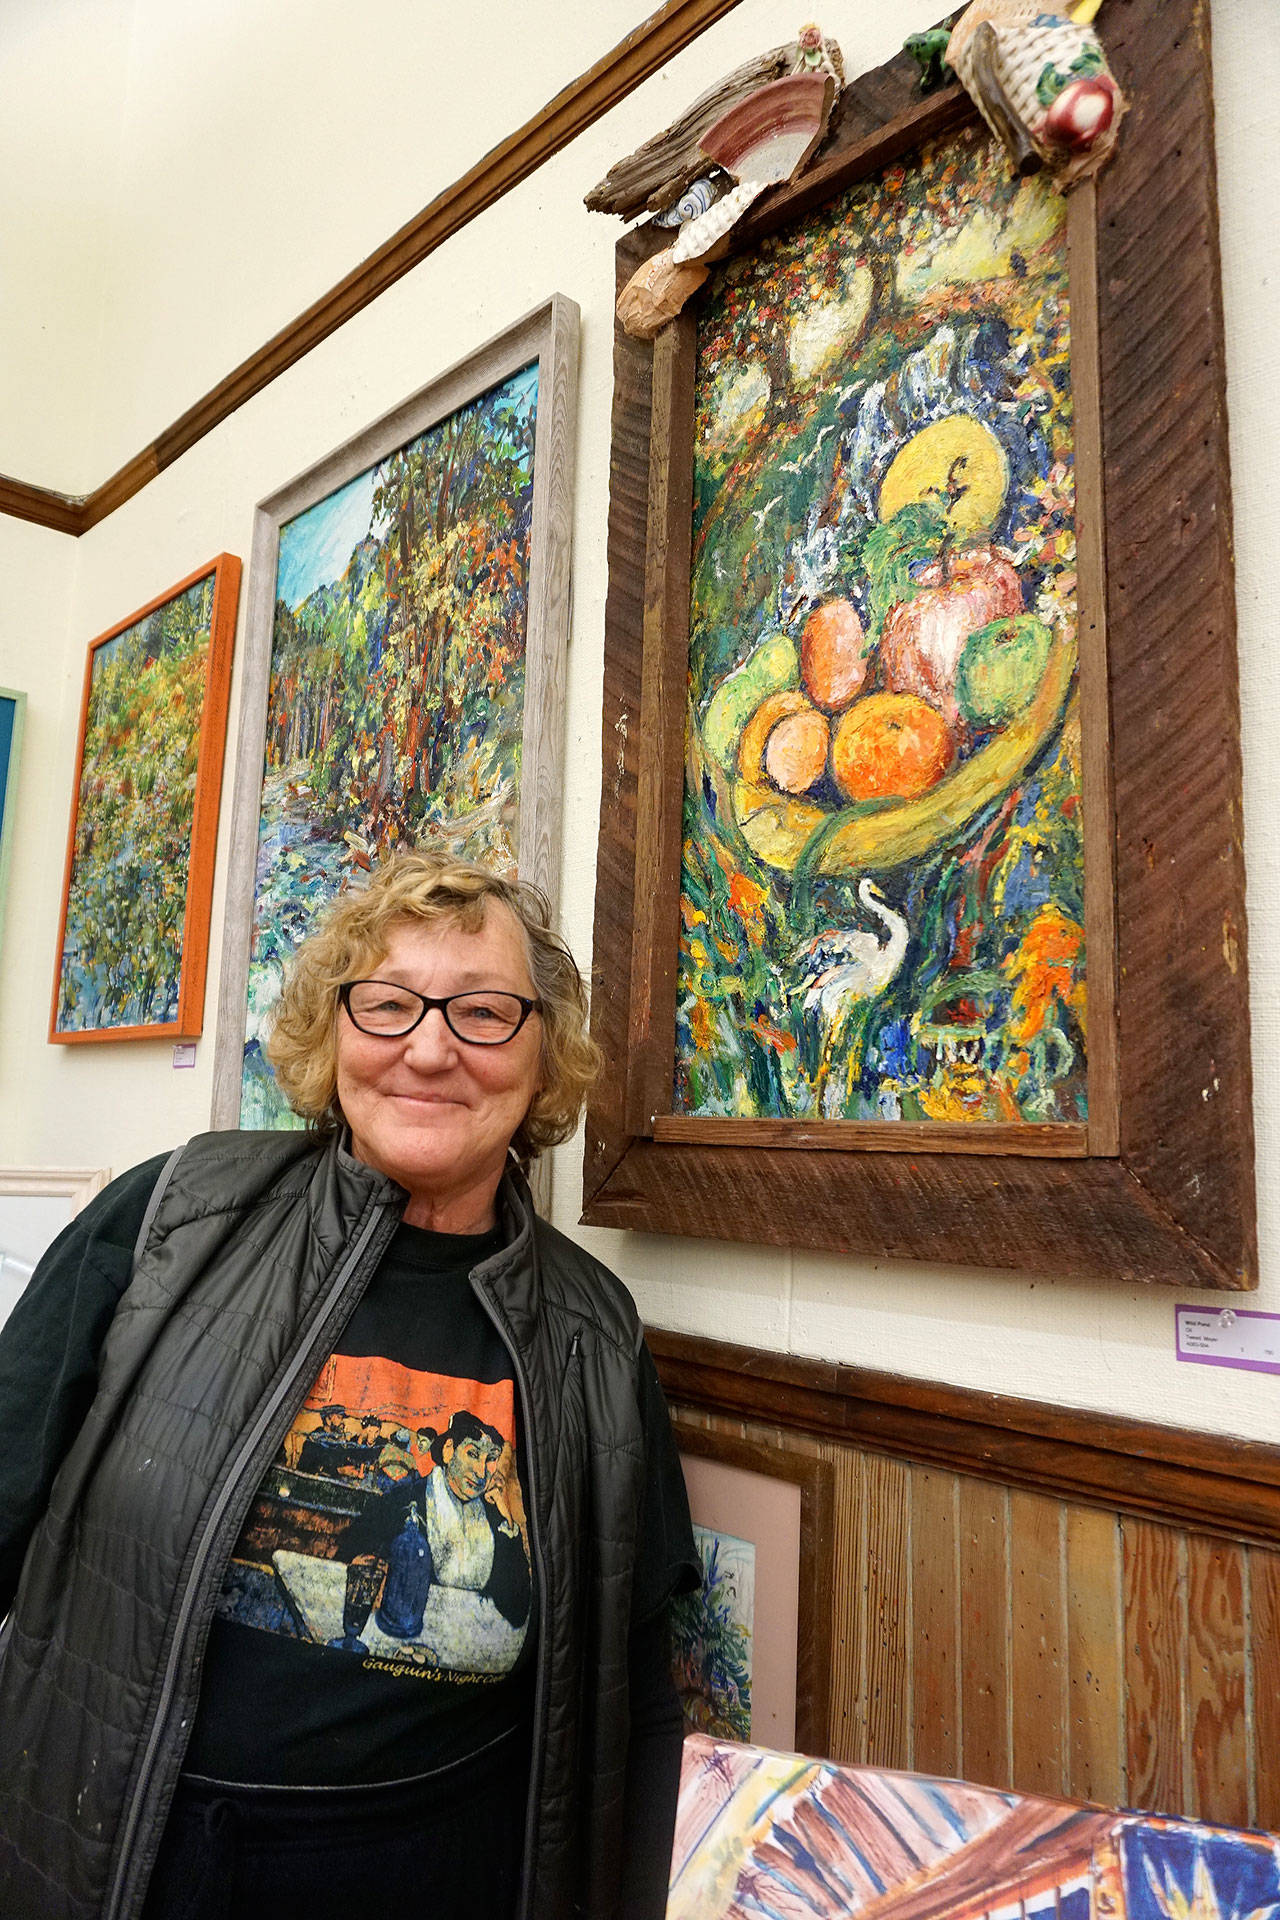 Tweed Meyers’ high-energy is expressed in her vibrant work now showing at the Sidney Art Gallery throughout January. (Bob Smith | Kitsap Daily News)